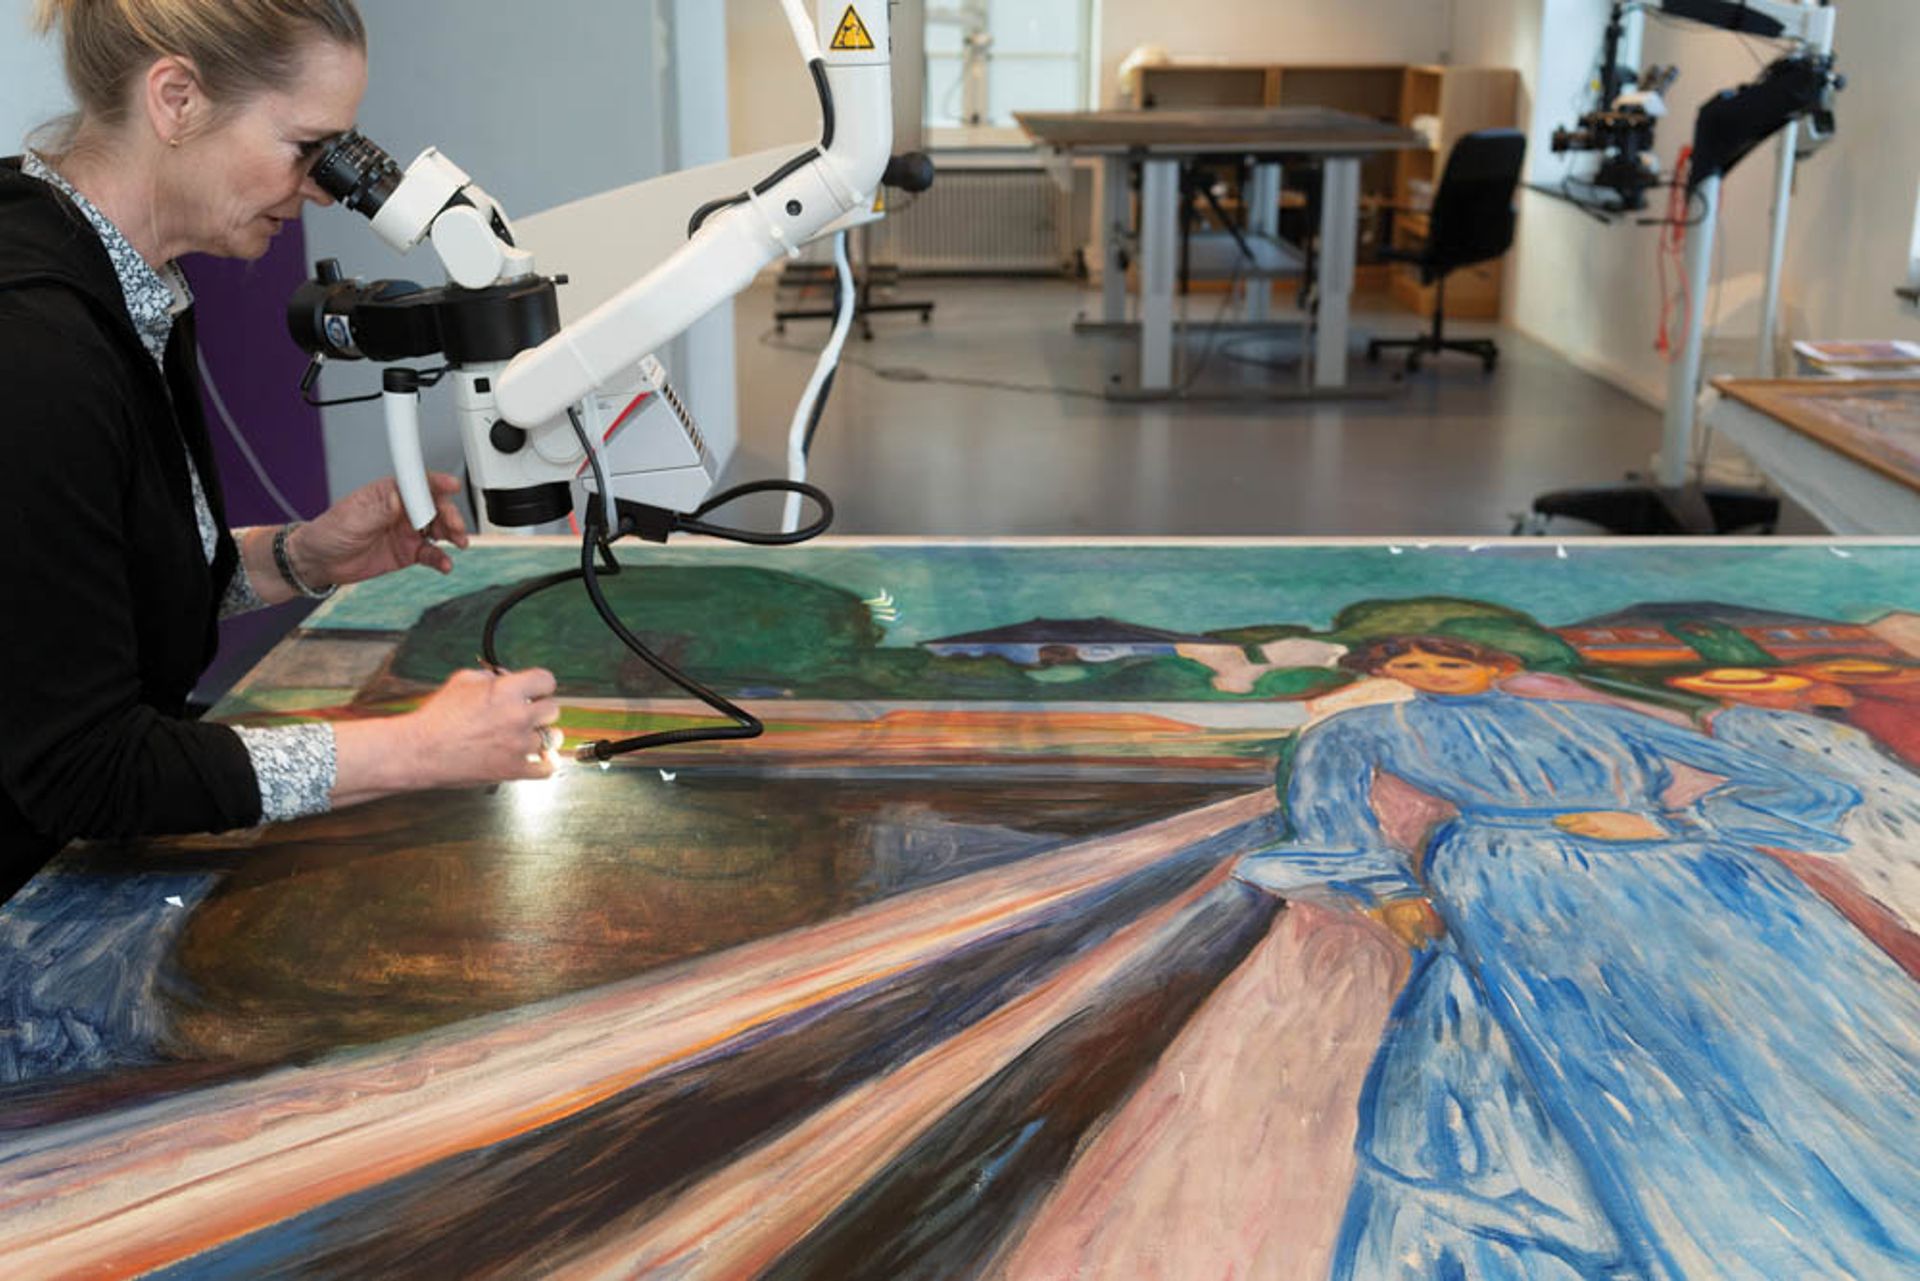 Eighteen Edvard Munch paintings bound for a new show at London’s Courtauld Gallery were first examined and cleaned by their lender, Kode museums in Bergen, Norway Dag Fosse/KODE


